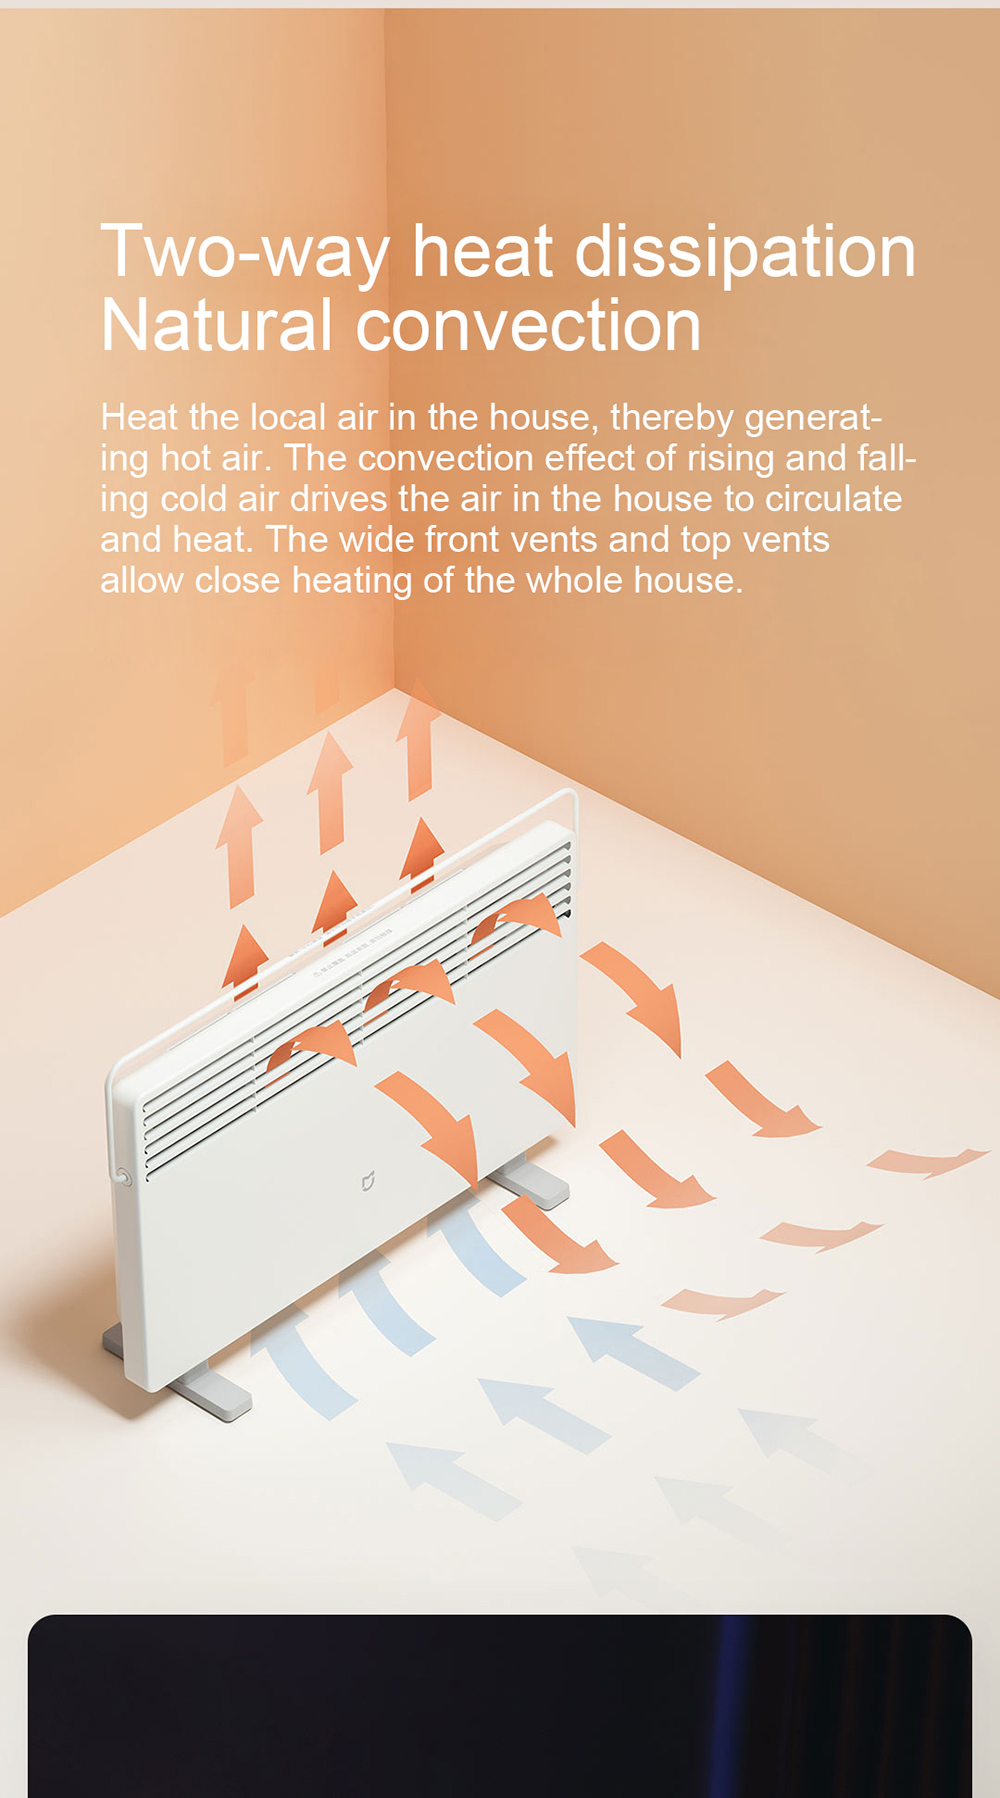 Two-way heat dissipation natural convection